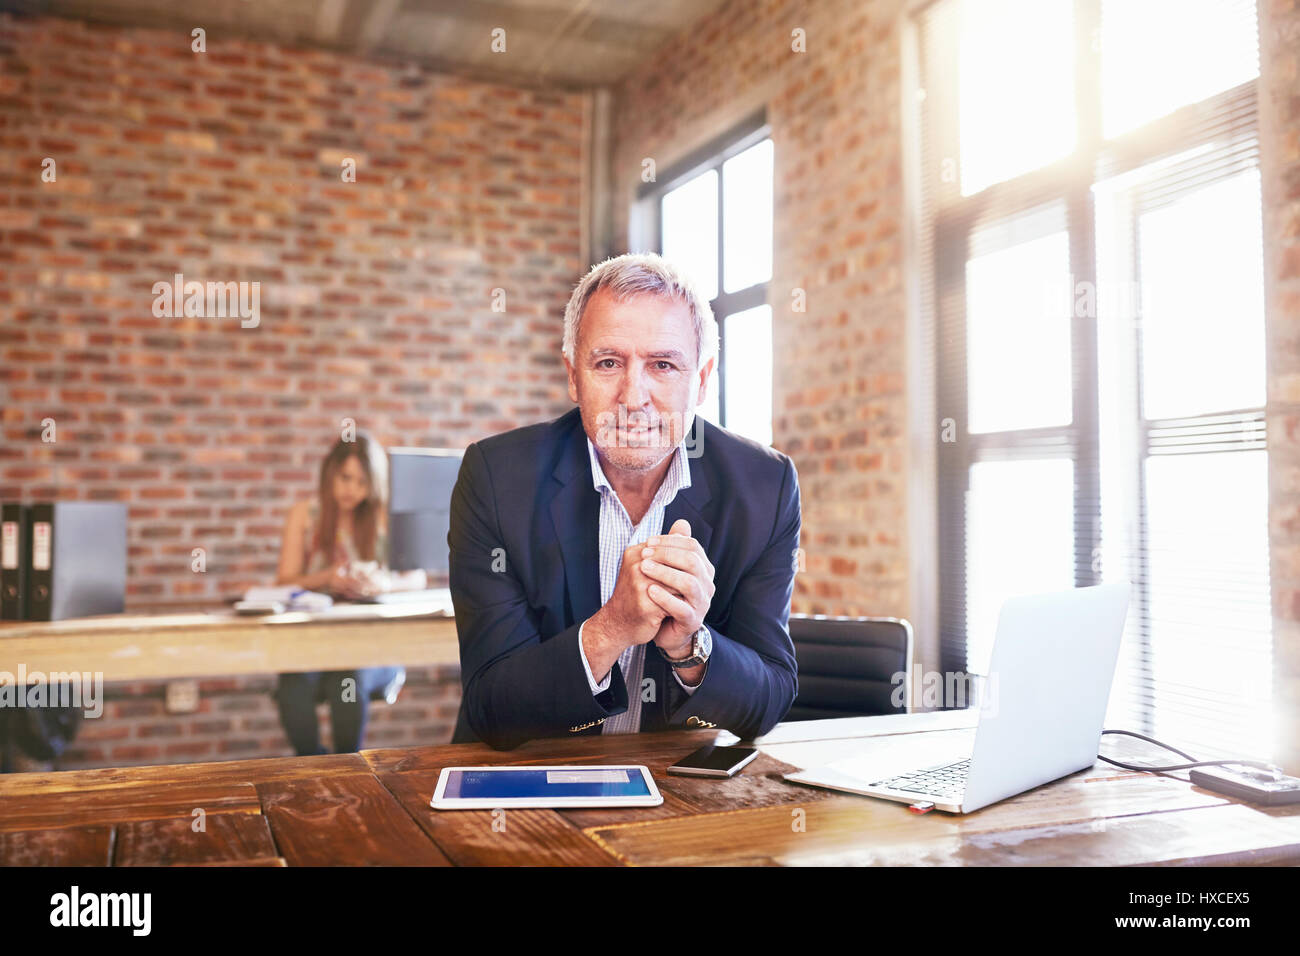 Portrait confident businessman with digital tablet and laptop in office Banque D'Images